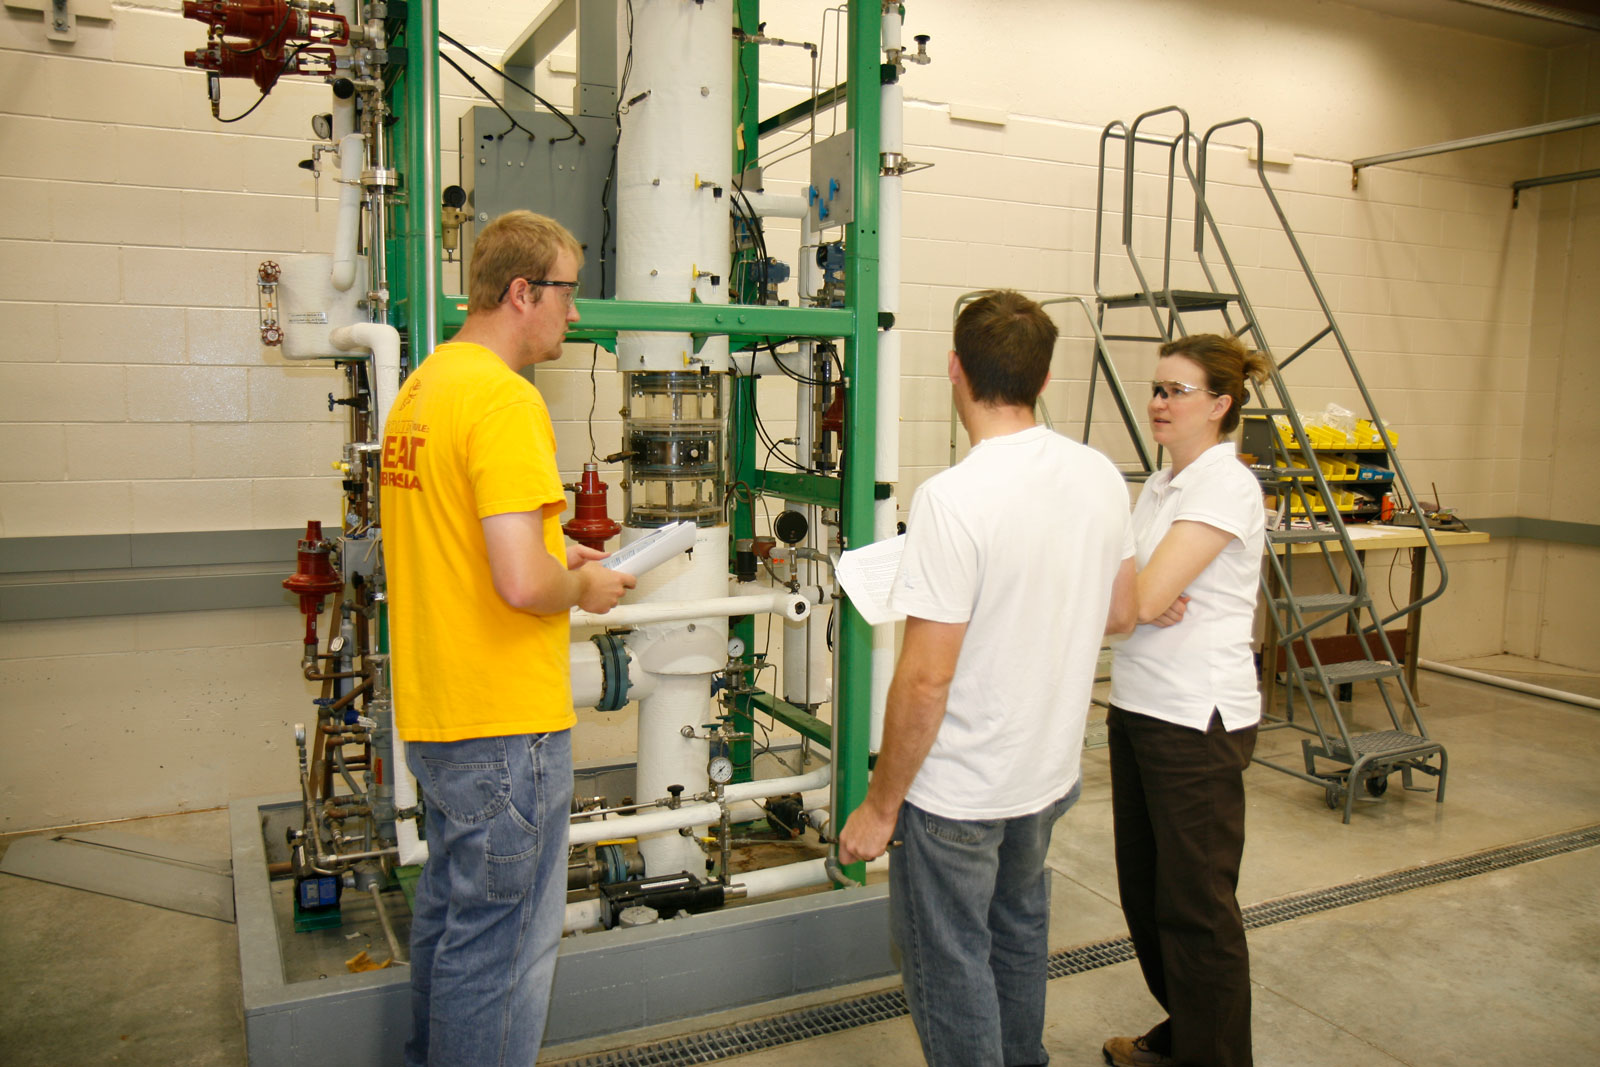 Students and faculty working on equipment